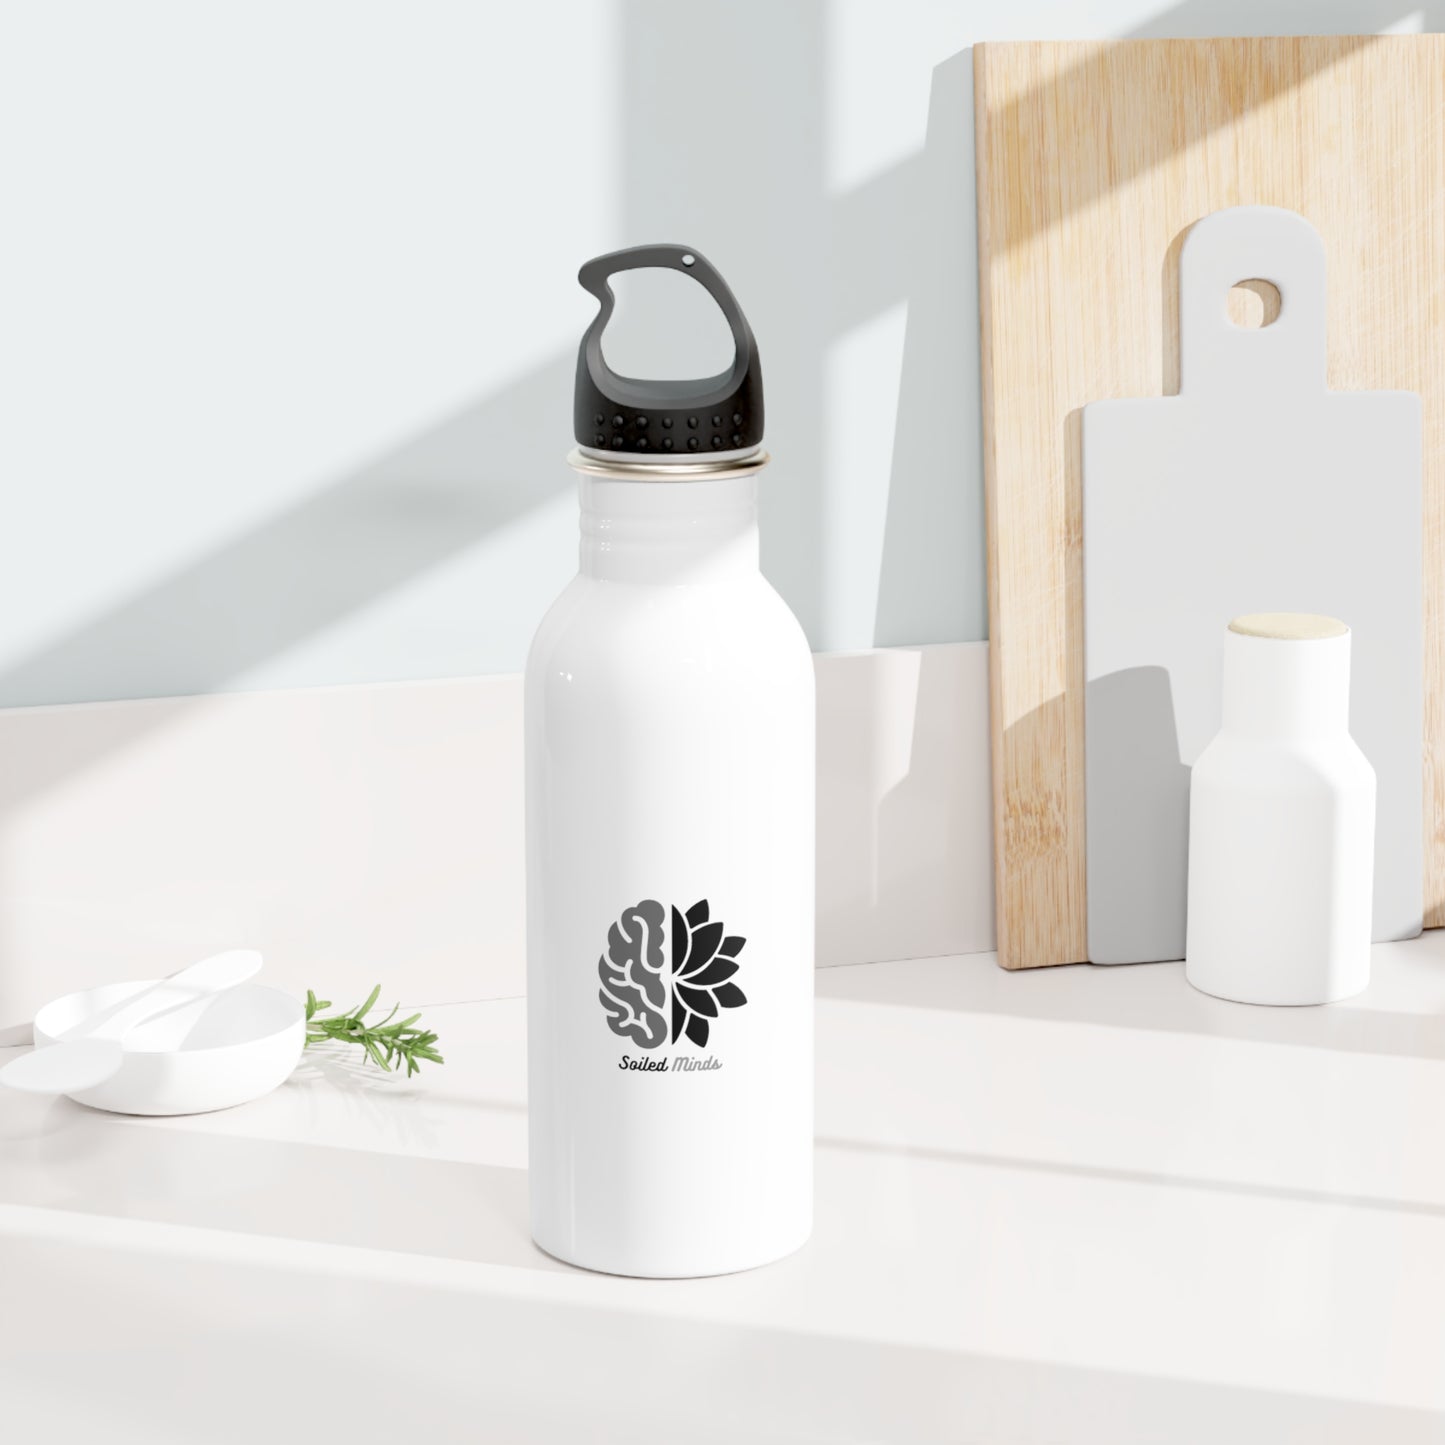 Soiled Minds Stainless Steel Water Bottle